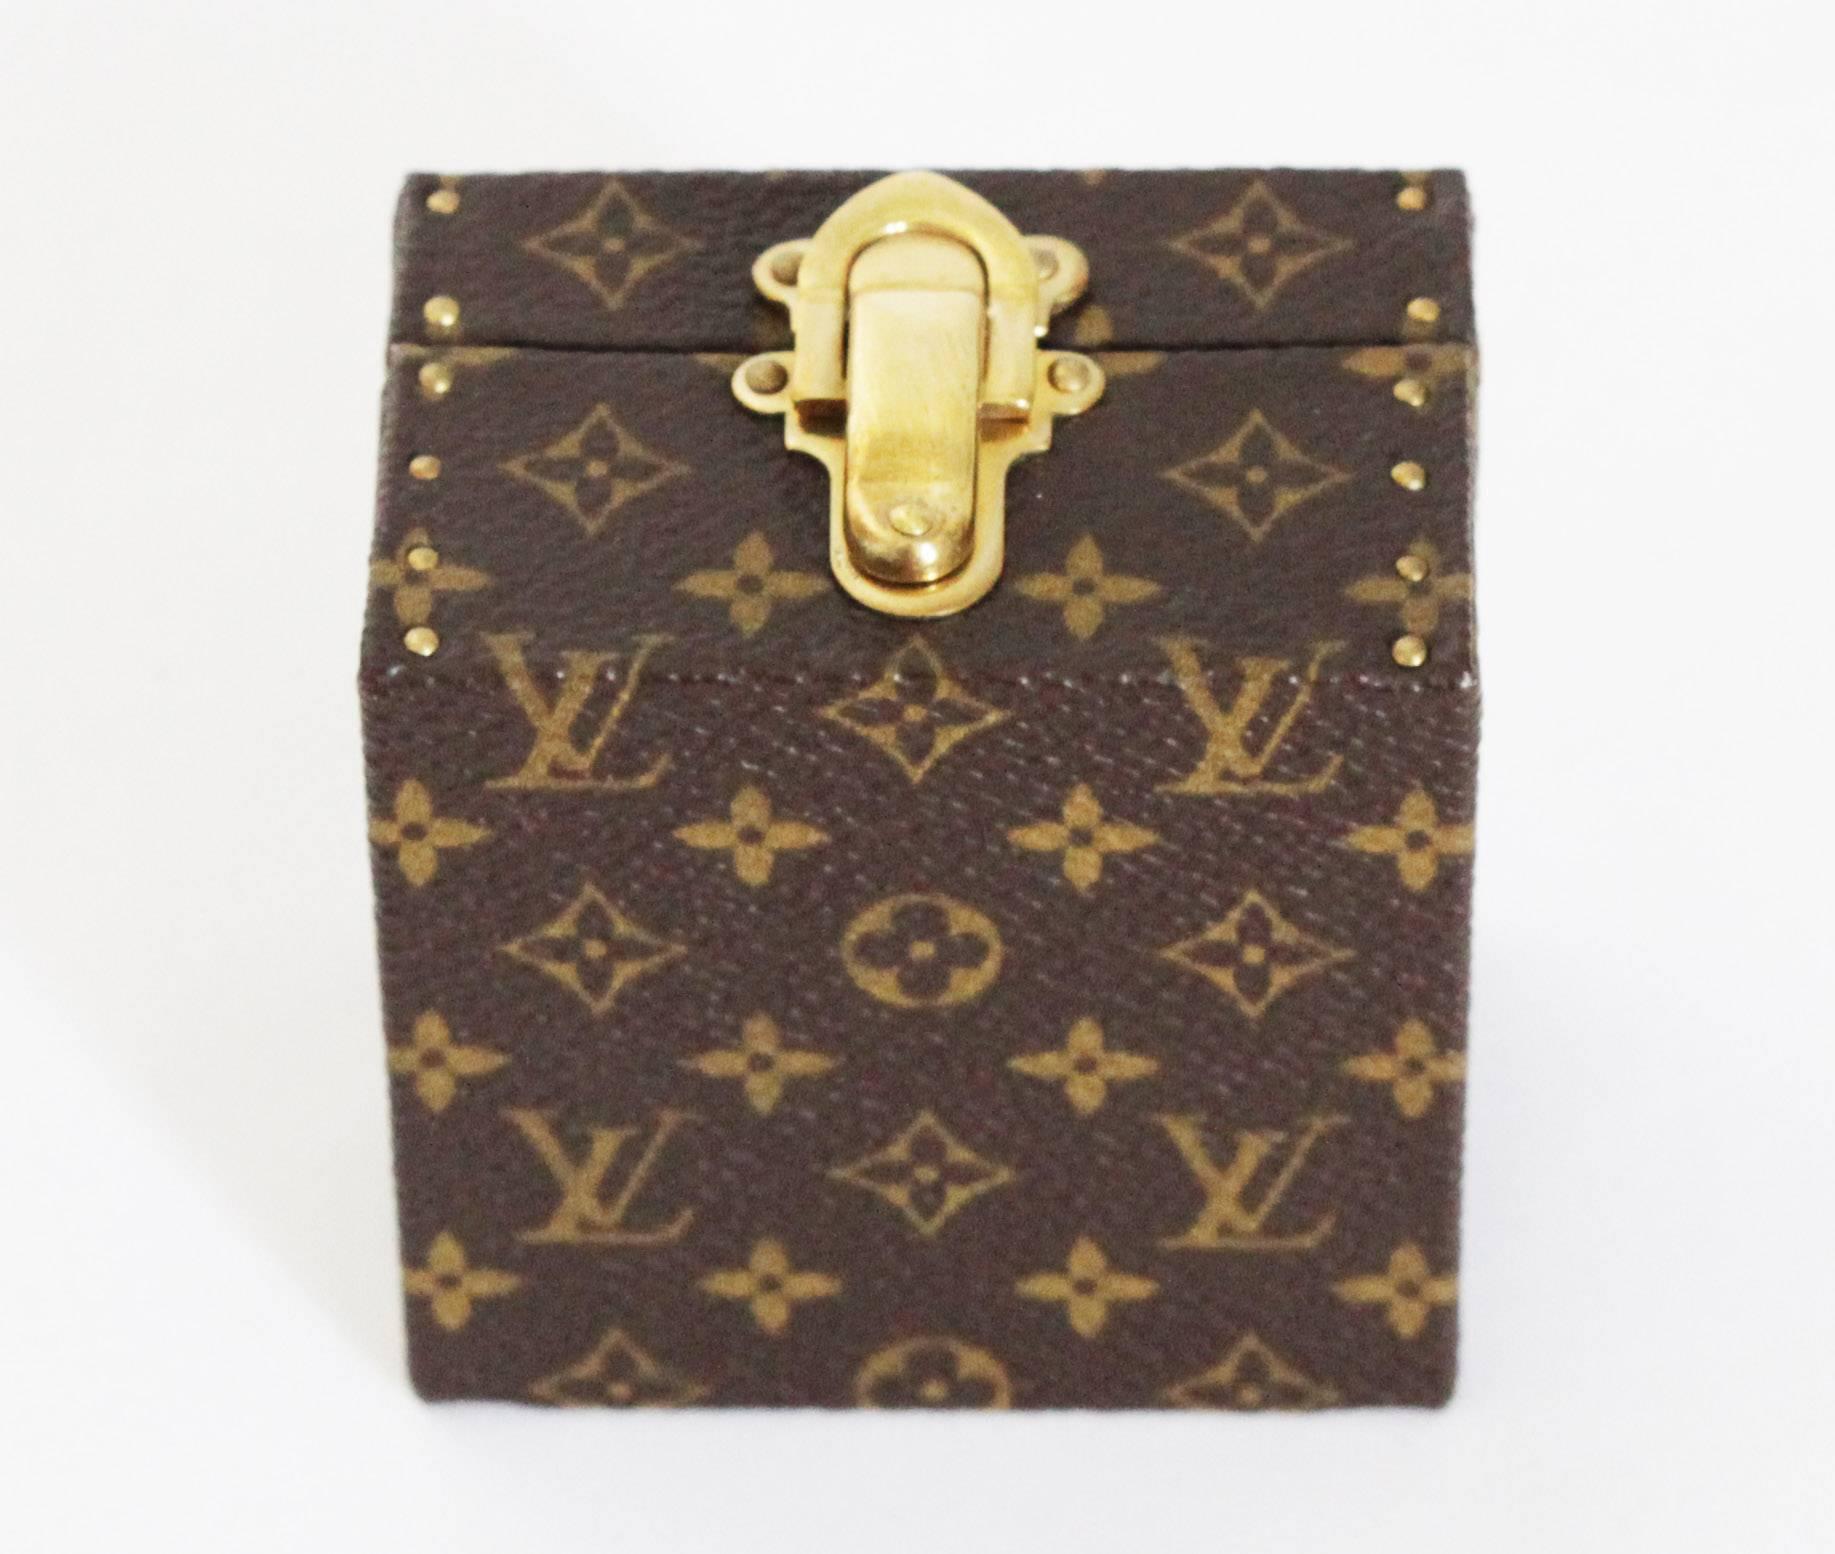 Hard to find Louis Vuitton Jewelry box. 
Excellent condition. 
Size: 6.5 x 6.5 x 4.5 cm - 2.6 x 2.6 x 1 3/4 in.